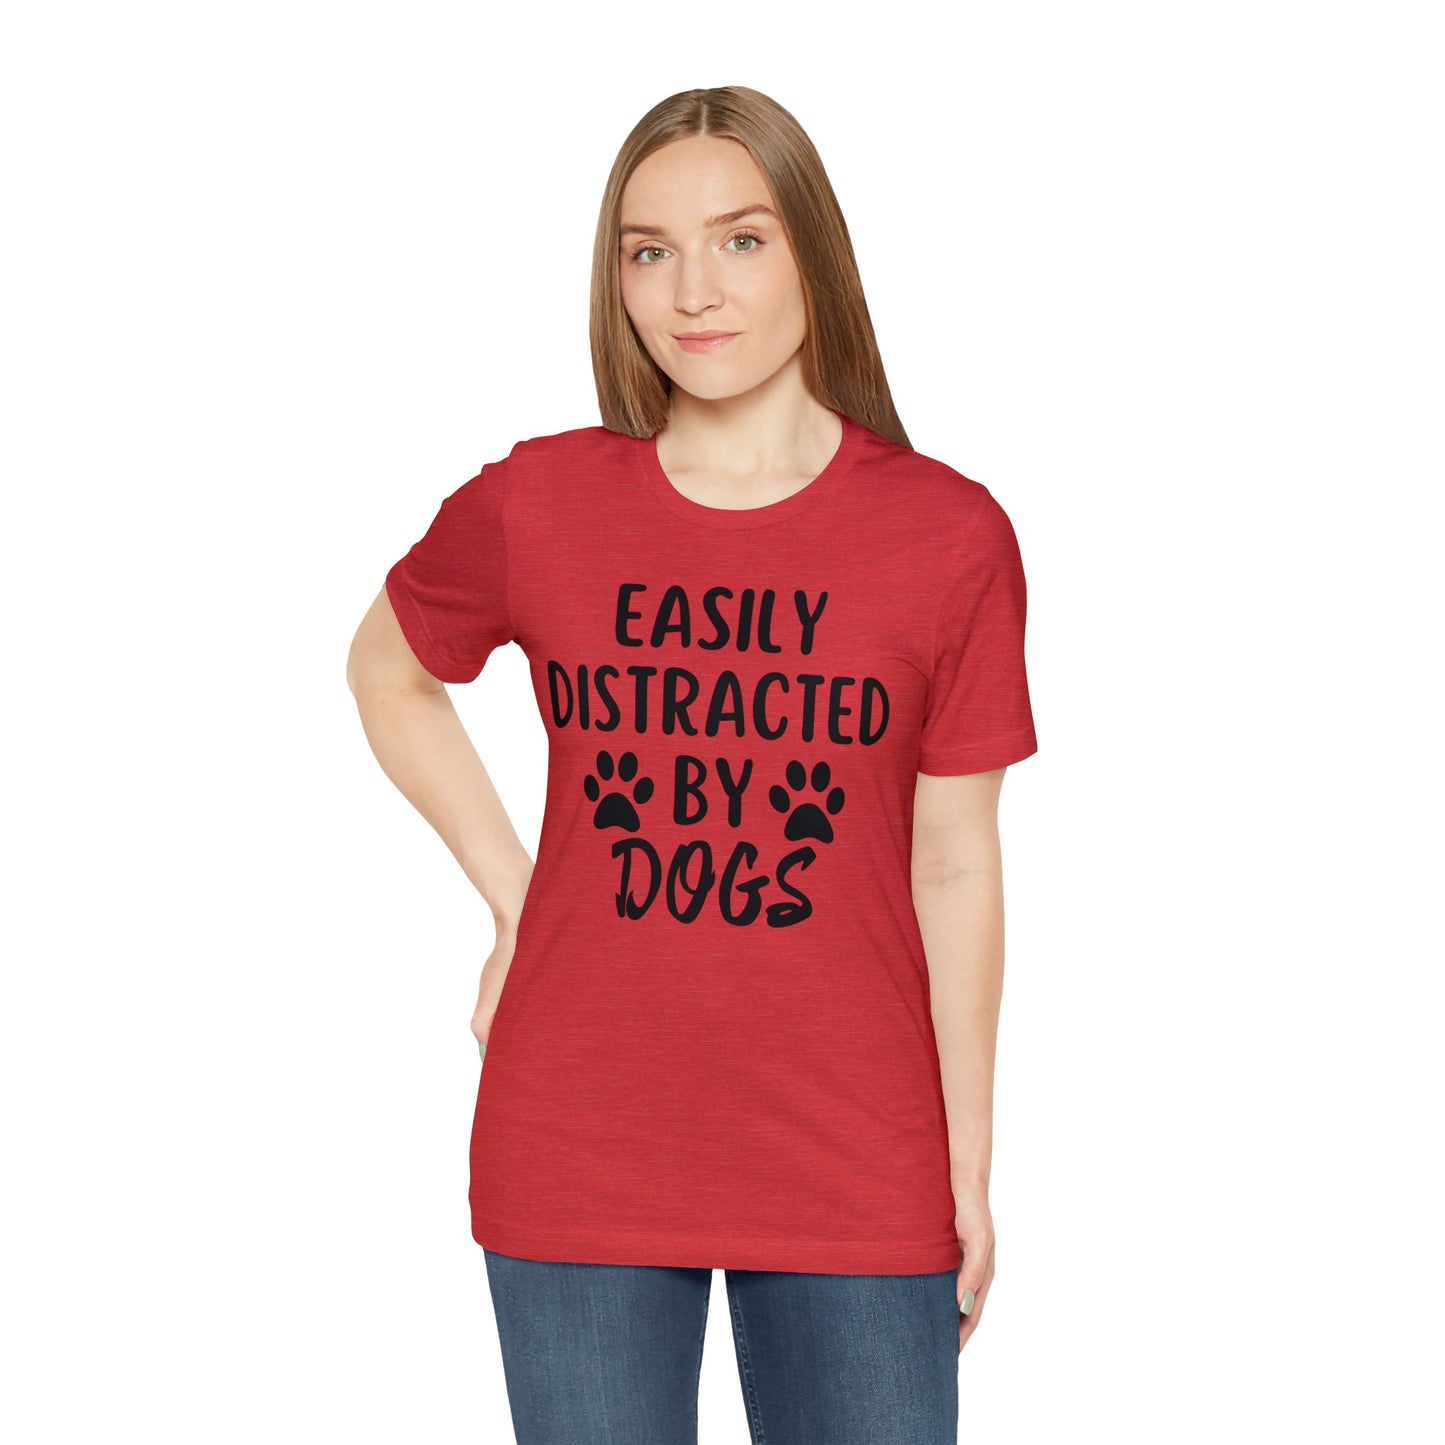 Easily Distracted By Dogs - Unisex Jersey Short Sleeve Tee